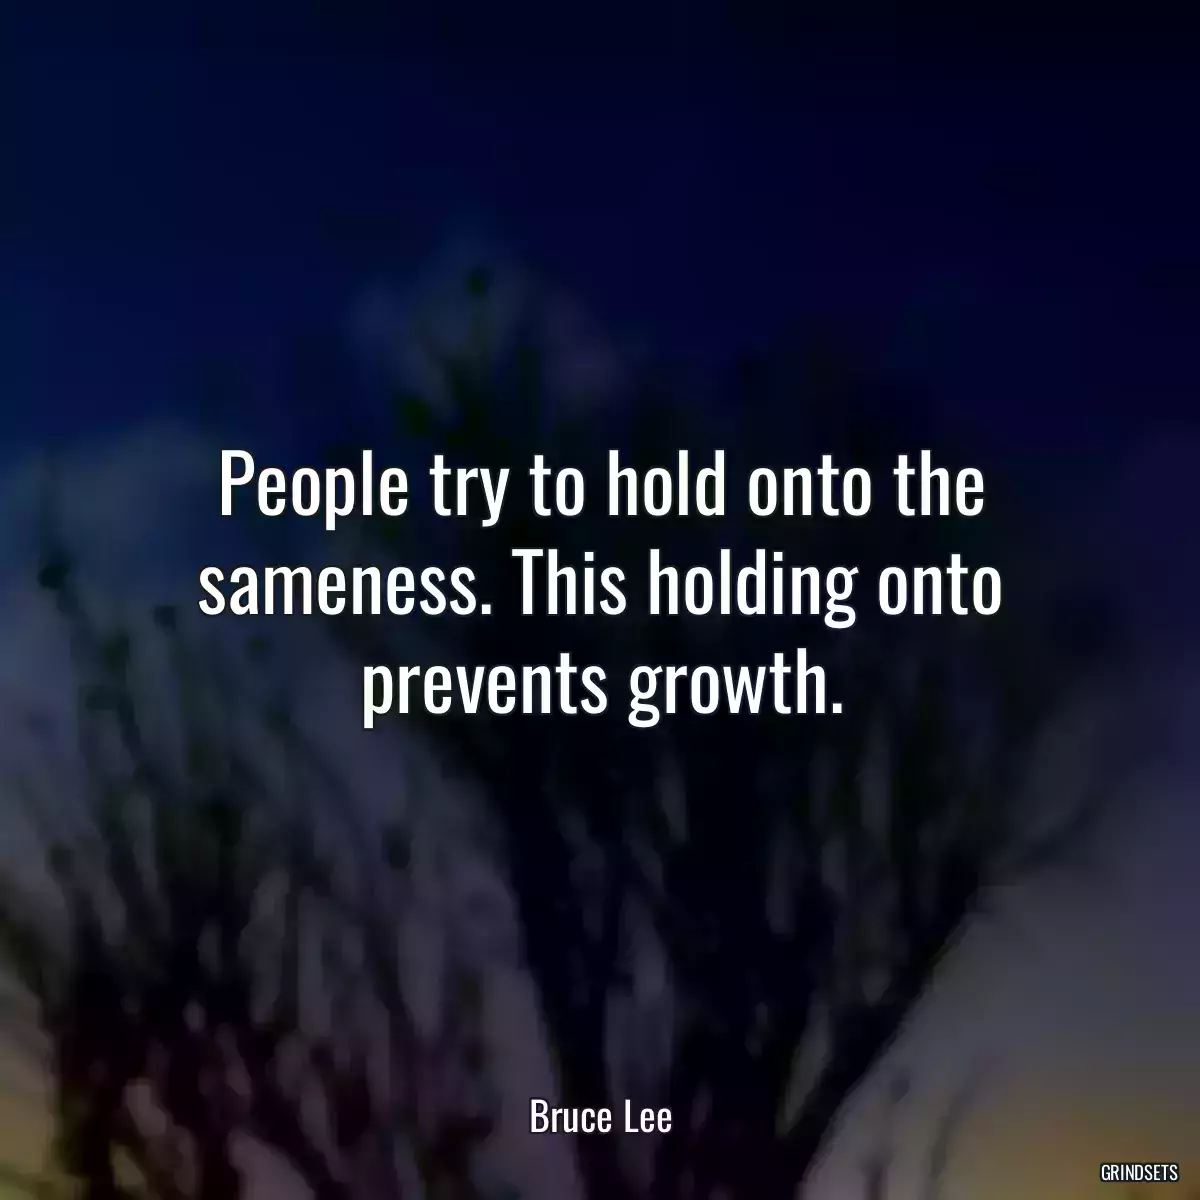 People try to hold onto the sameness. This holding onto prevents growth.